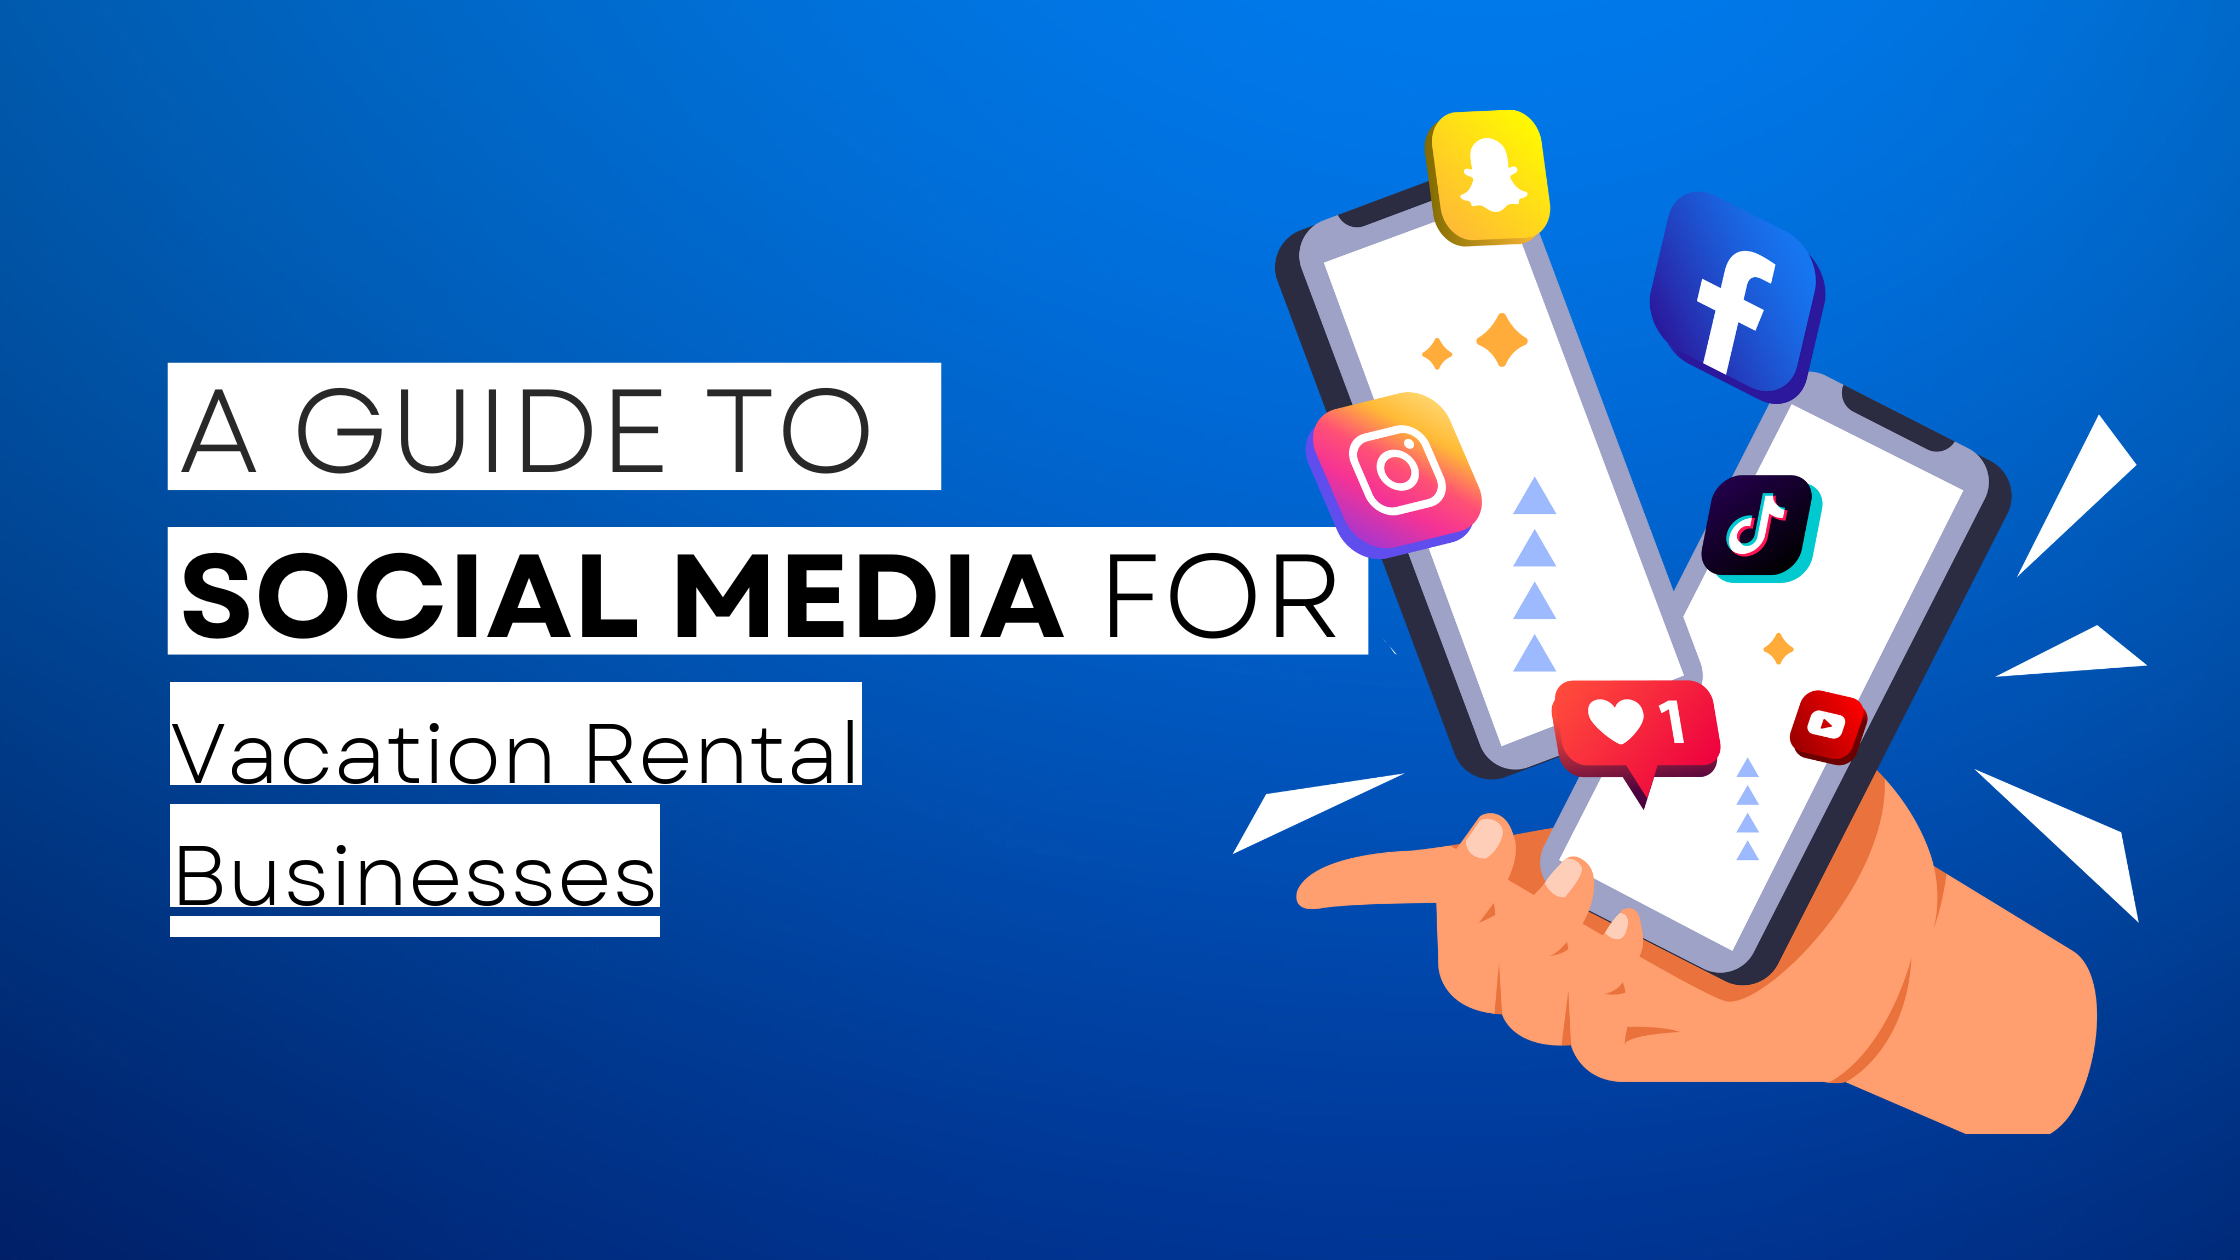 How to start Vacation Rental on social media